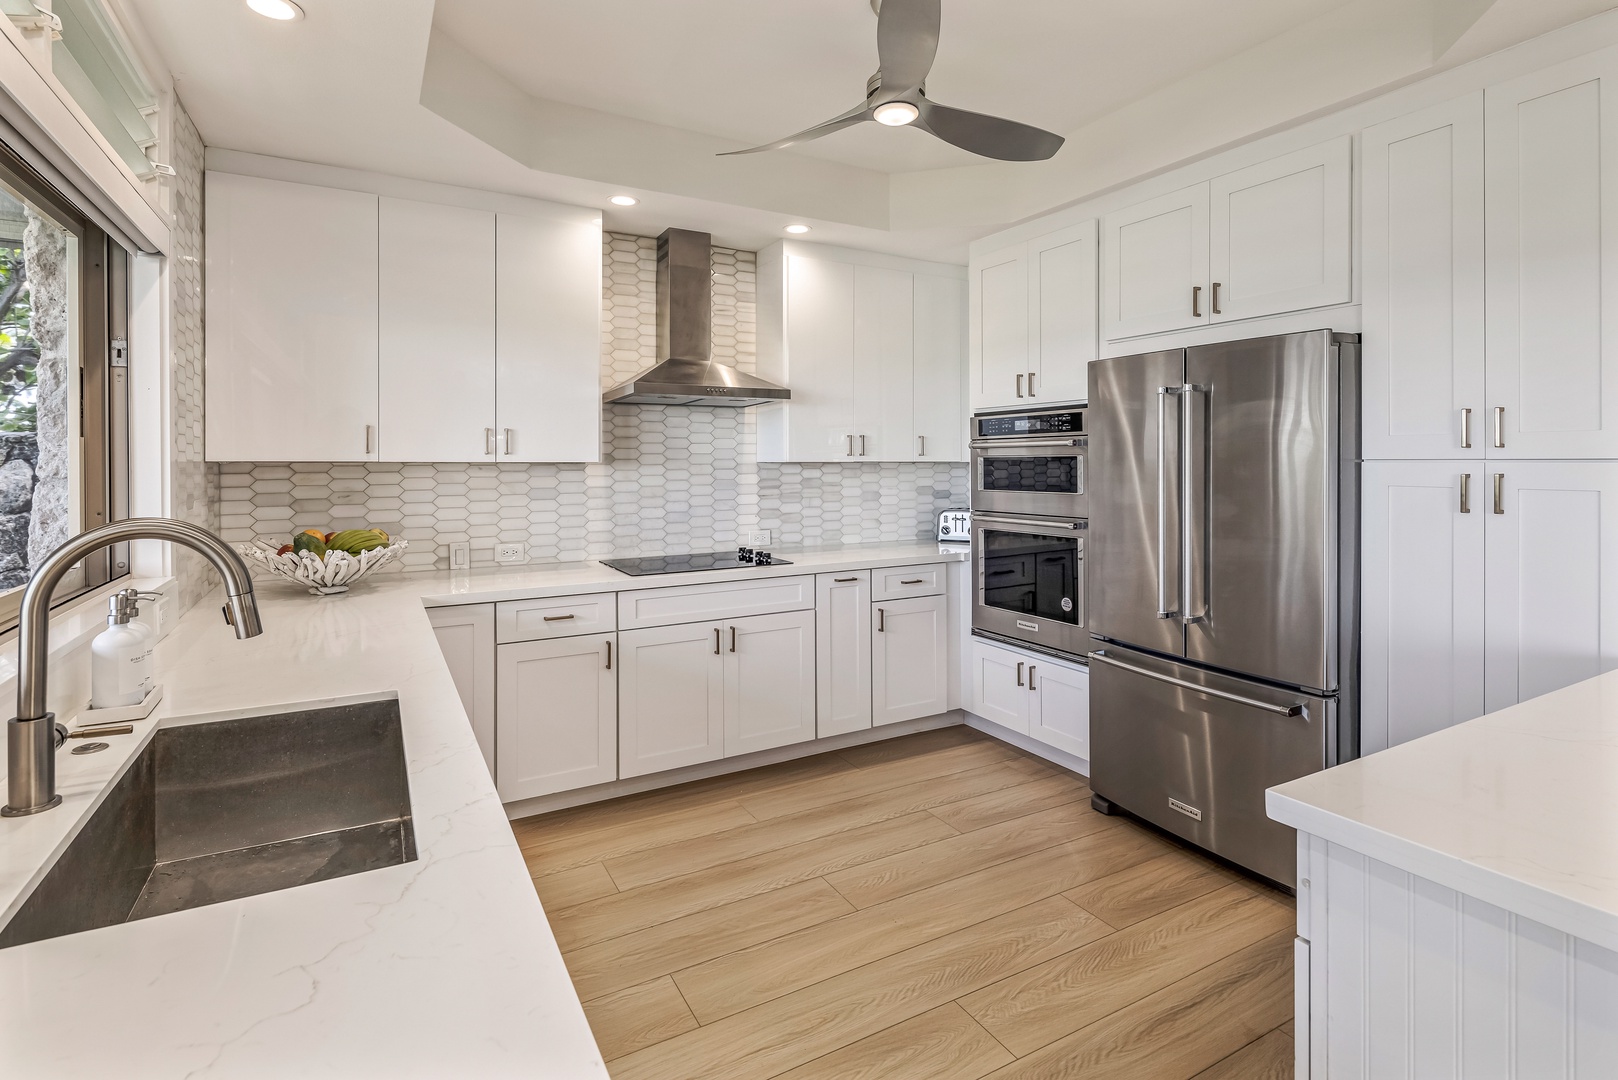 Kailua Vacation Rentals, Na Makana Villa - Fully equipped with everything you need to prepare your favorite meals and has stainless steel appliances